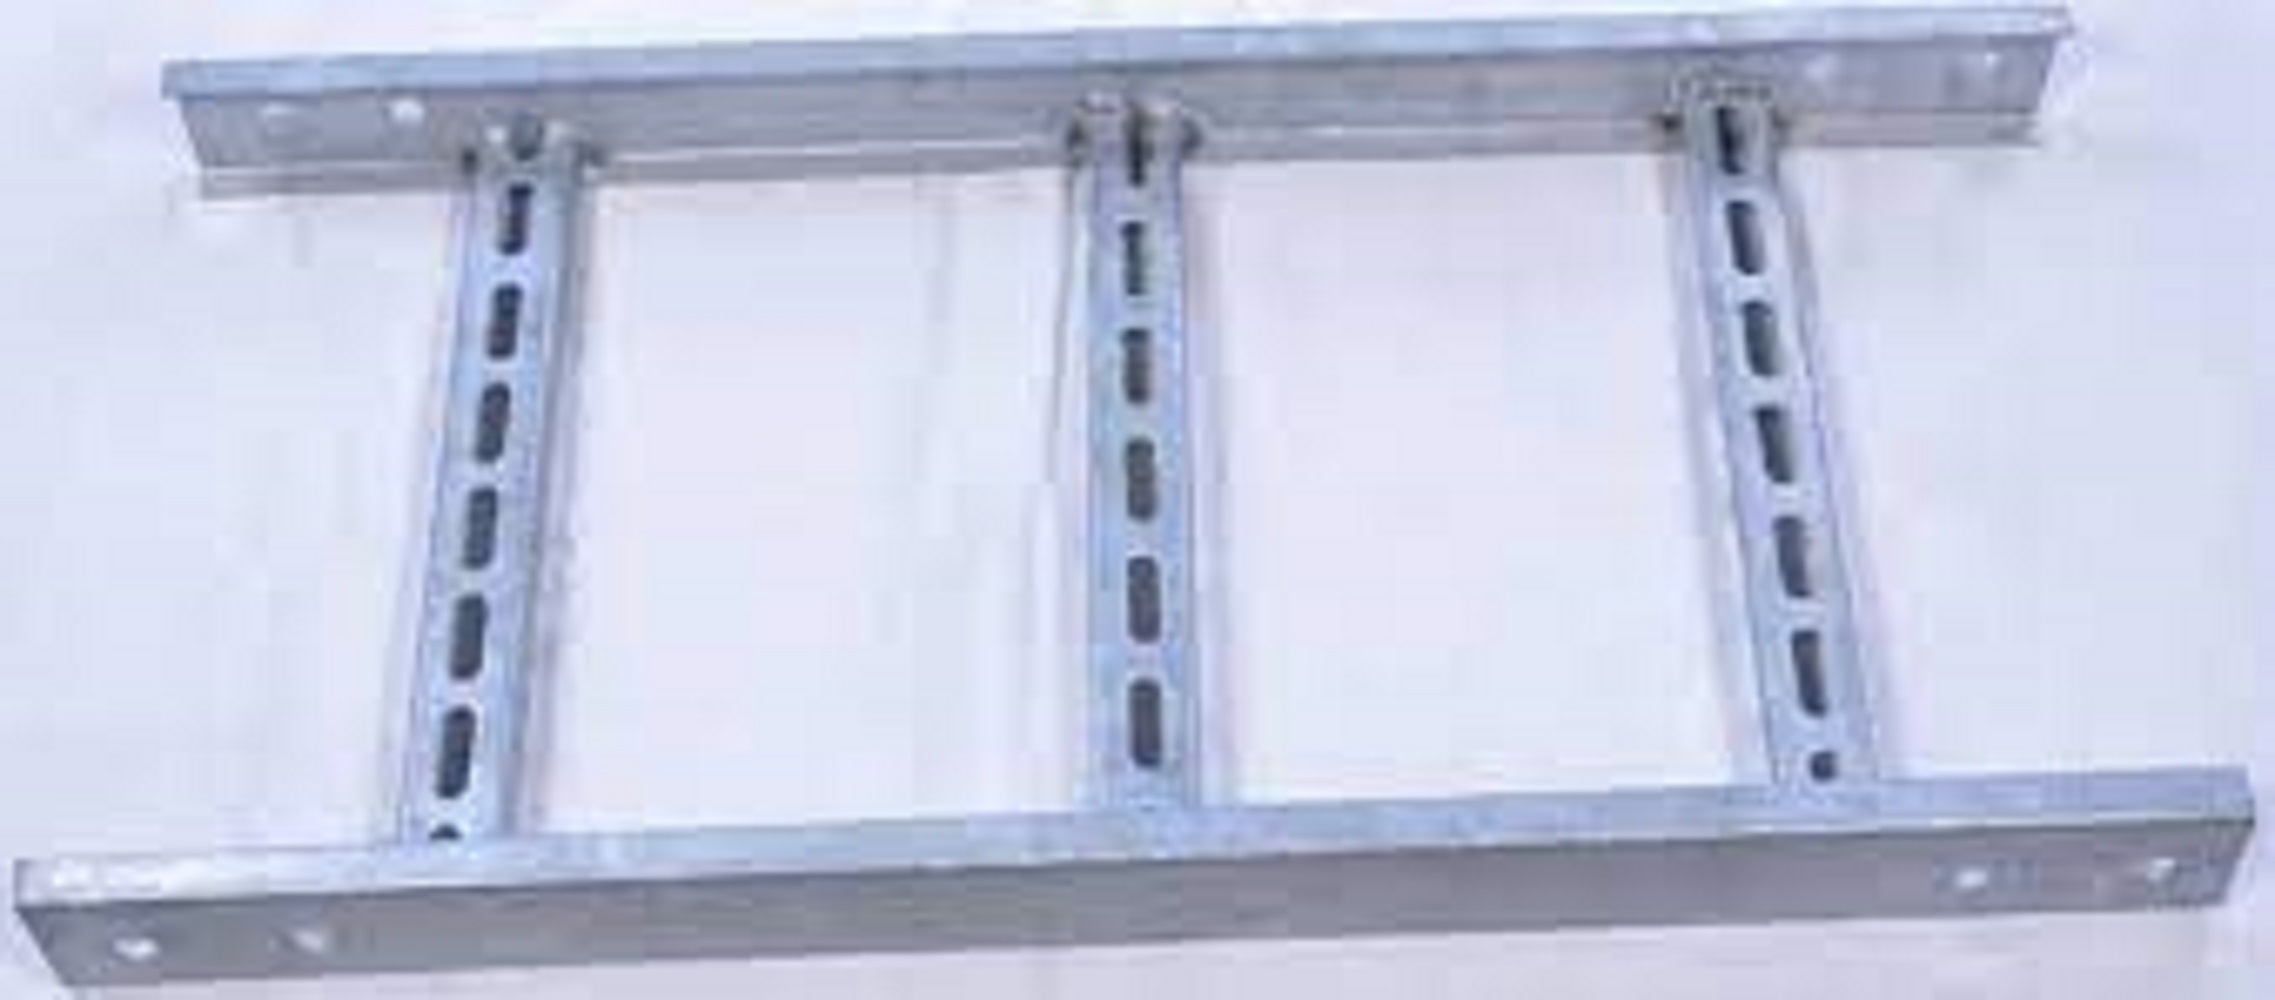 Gi Ladder Type Cable Tray